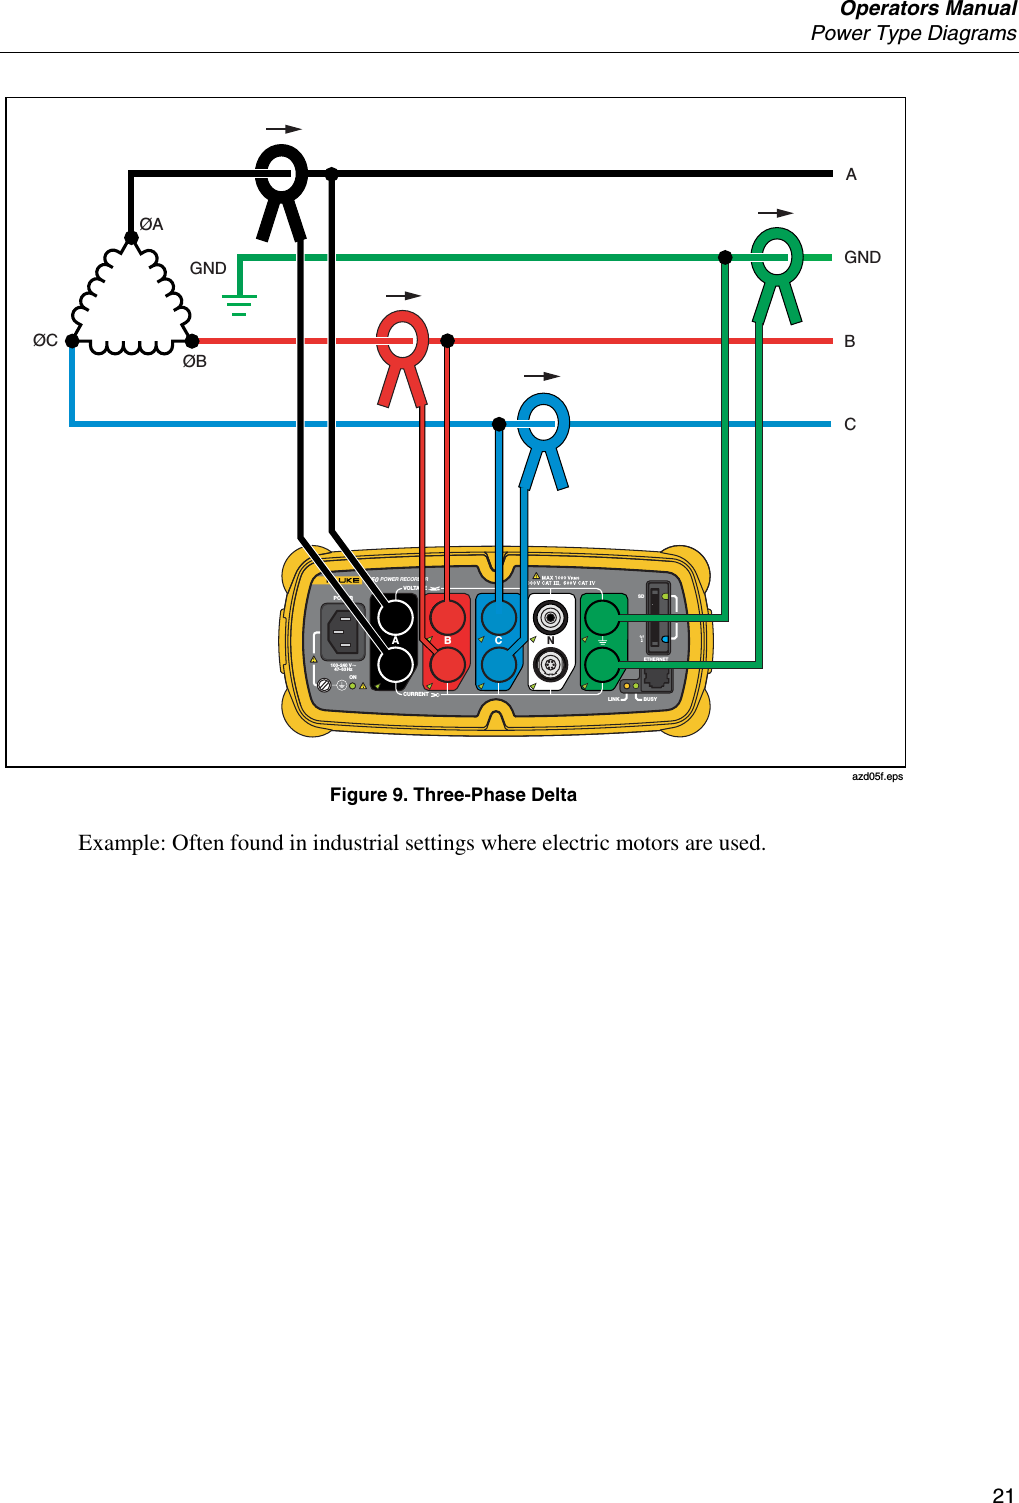  Operators Manual  Power Type Diagrams     21 SDETHERNETPOWER1750 POWER RECORDERONBUSYLINK100-240 V   47- 63HzBACNVOLTAGECURRENTGNDØABCAGNDØCØB azd05f.eps Figure 9. Three-Phase Delta Example: Often found in industrial settings where electric motors are used. 